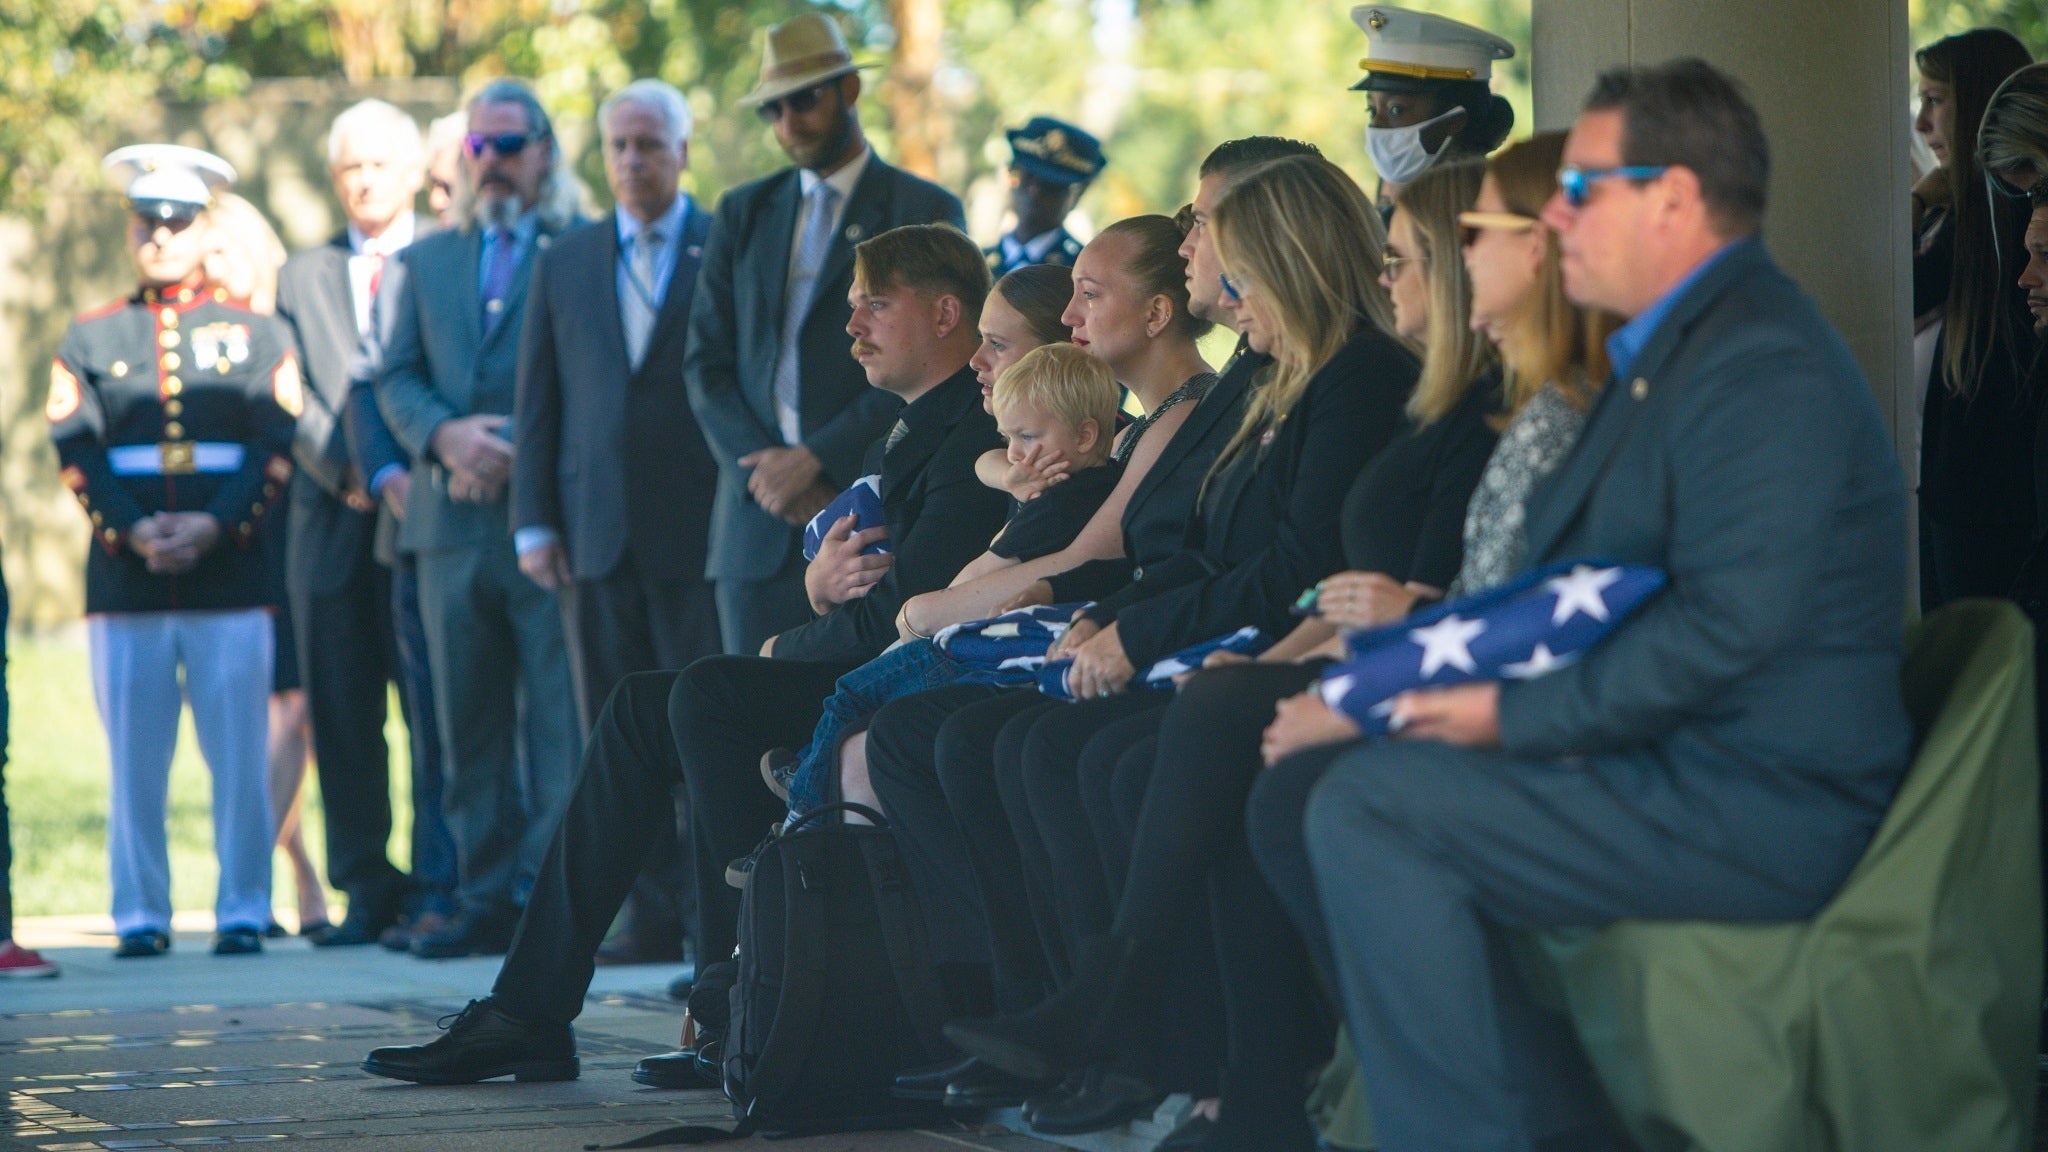 Friends and family pay their respects during a full honors funeral for Sgt Nicole Gee at Arlington National Cemetery, Arlington, Va., Sept. 29, 2021. Sgt. Gee was a member of Combat Logistics Battalion 24, 2nd Marine Logistics Group, attached to the 24th Marine Expeditionary Unit based in Camp Lejeune, N.C. Sgt. Gee was one of 13 service members killed during the non-combatant evacuation operations at the Hamid Karzai Airport in Kabul, Afghanistan. (U.S. Marine Corps photo by Staff Sgt. Akeel Austin)